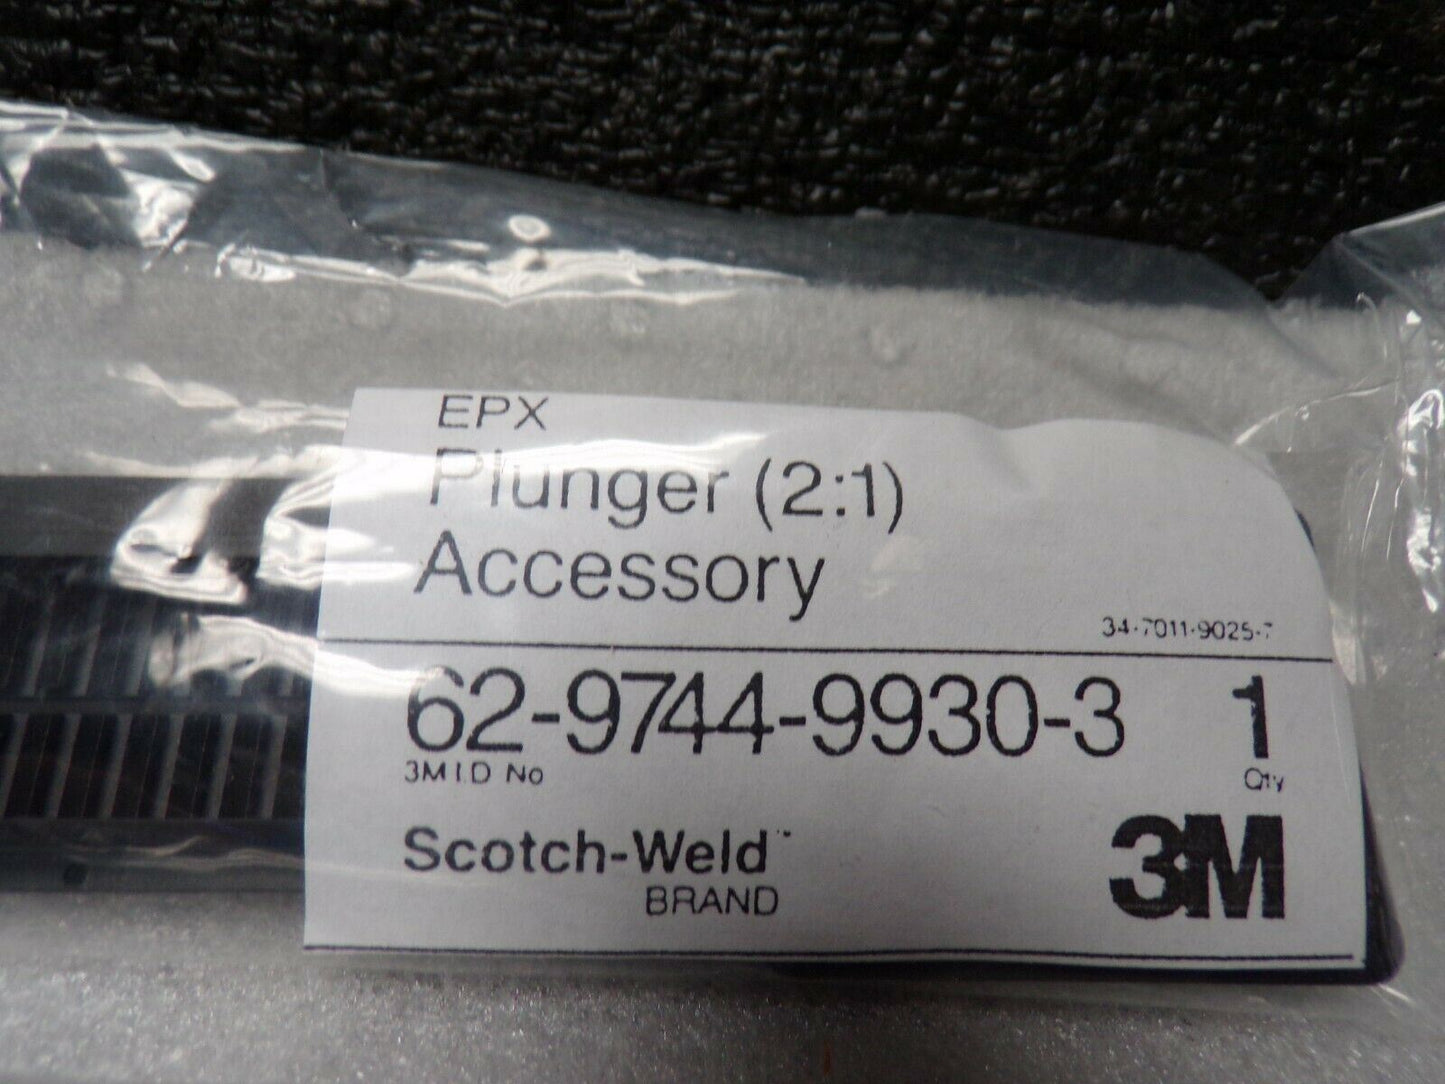 (3) 3M Scotch Weld Epx2:1 Plunger Assembly 62-9744-9930-3 (184489684382-BT50)